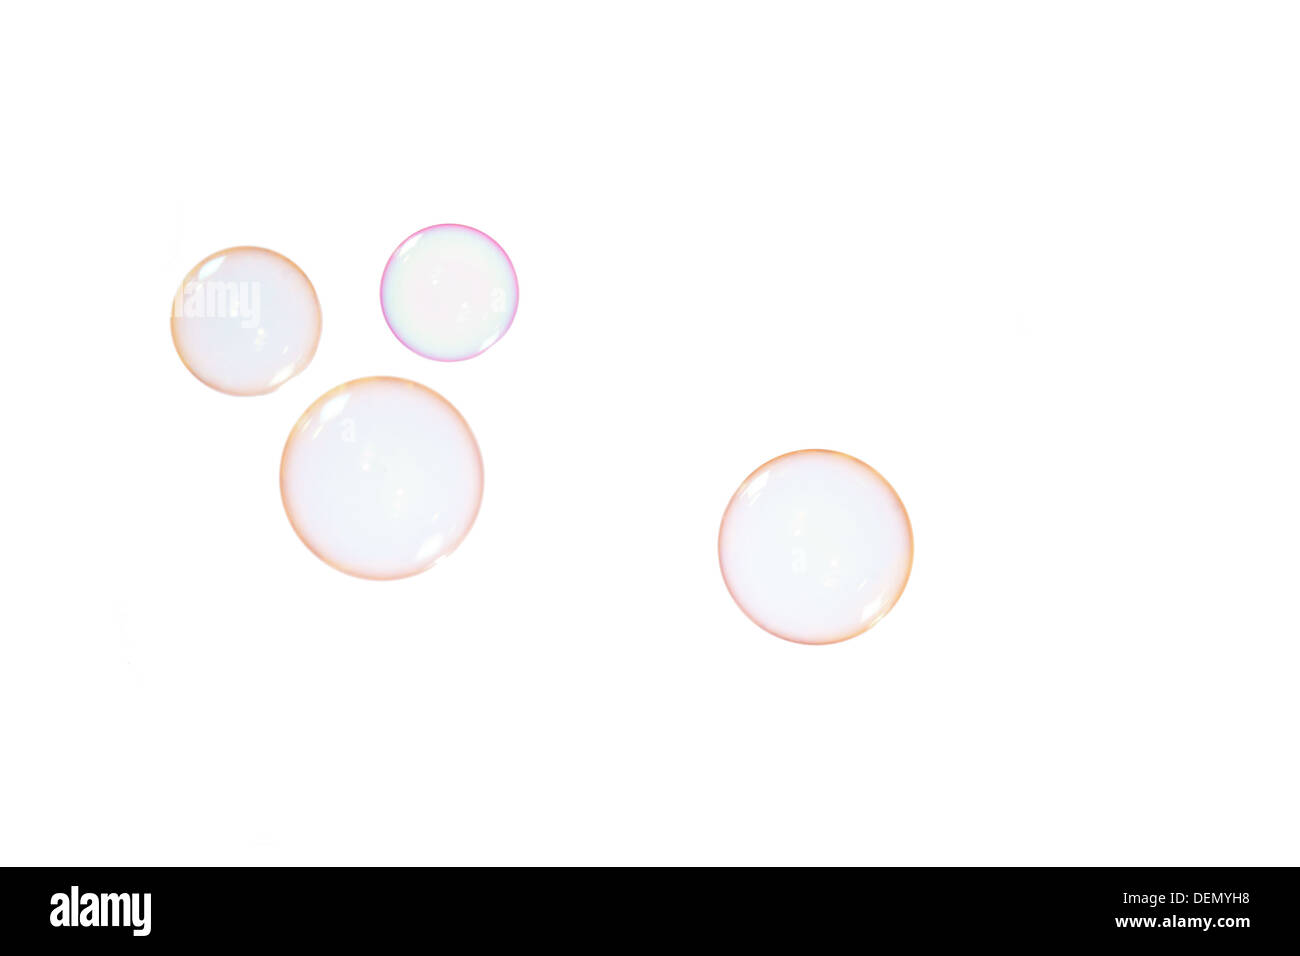 Group of soap bubbles on a white background Stock Photo